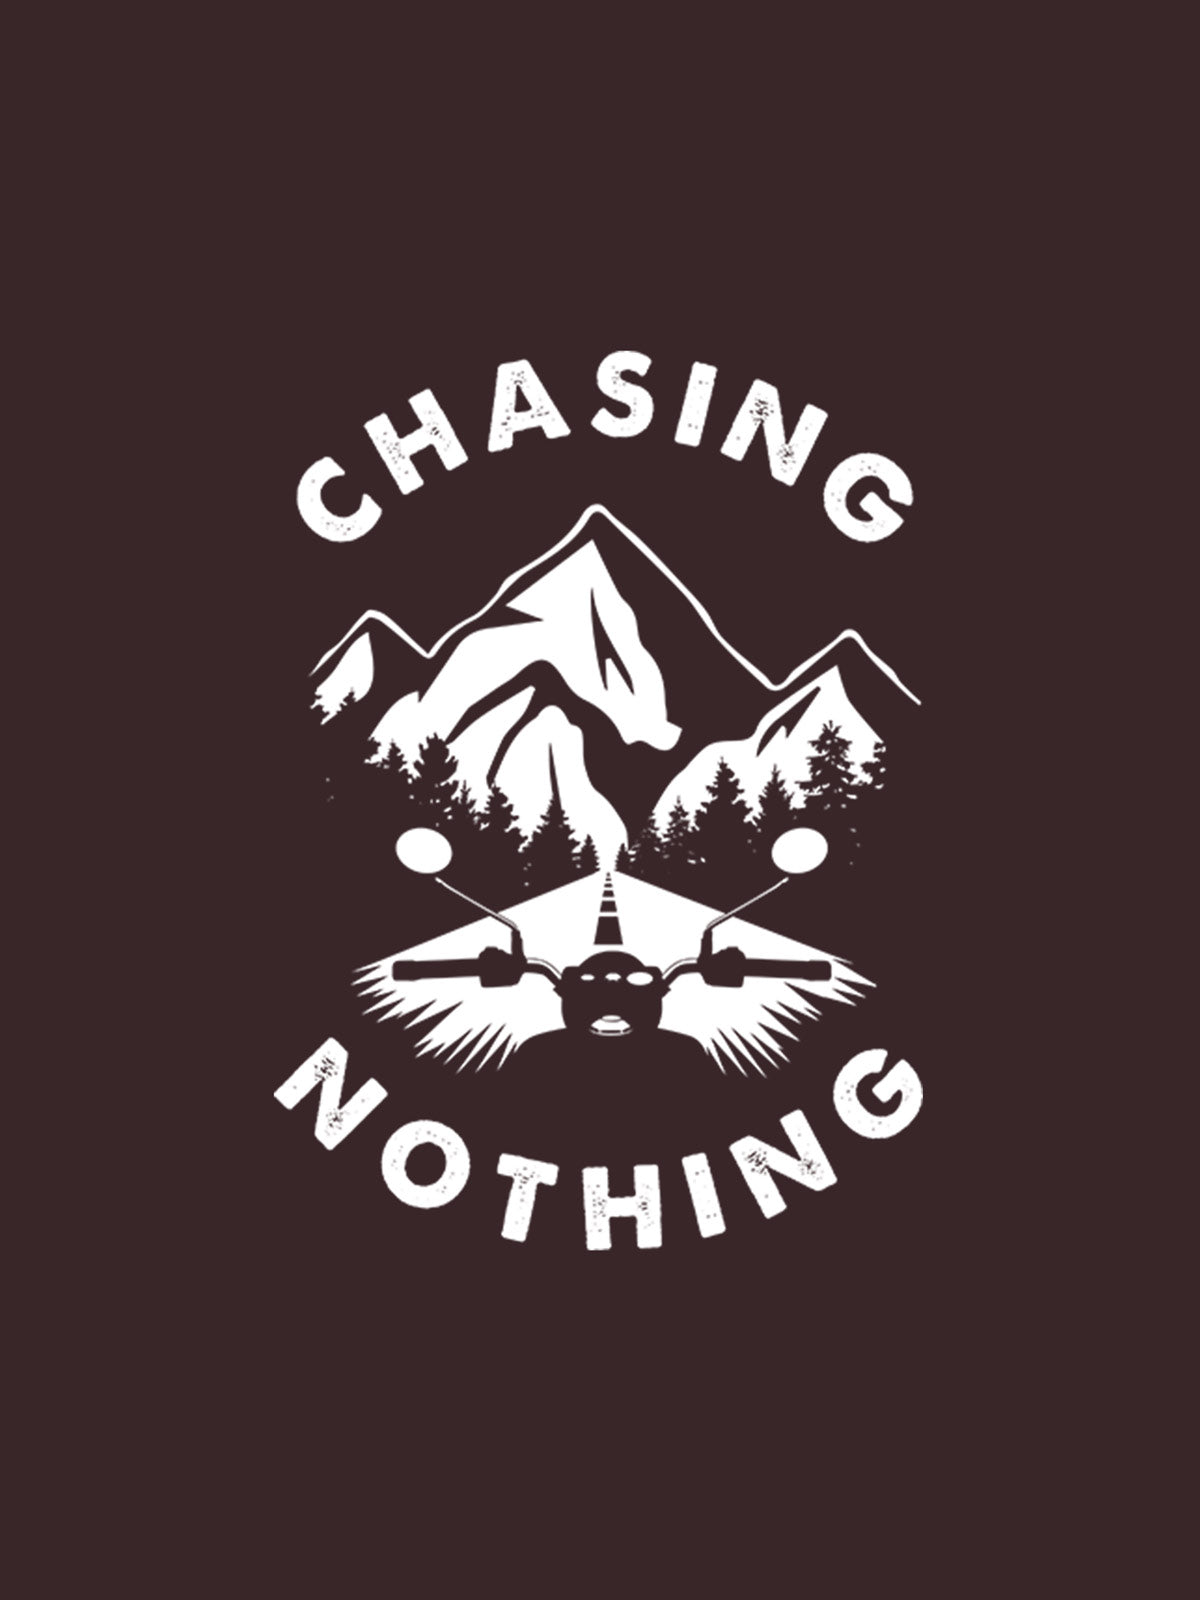 Chasing-nothing-printed-t-shirt-for-men by Ghumakkad